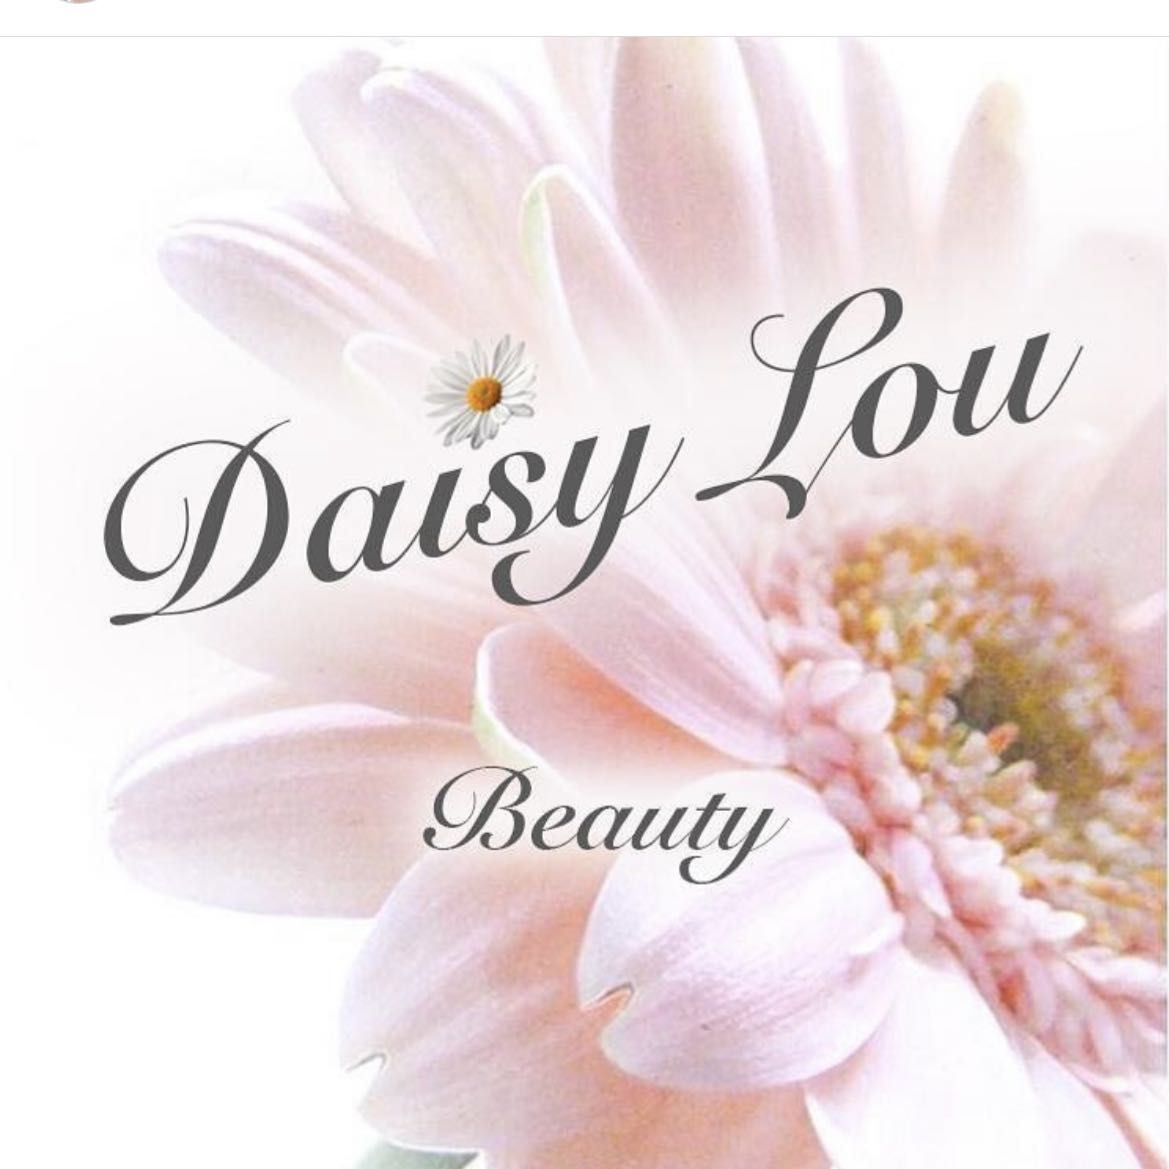 Daisy Lou Beauty, Muscliff Area, BH9 3QR, Bournemouth